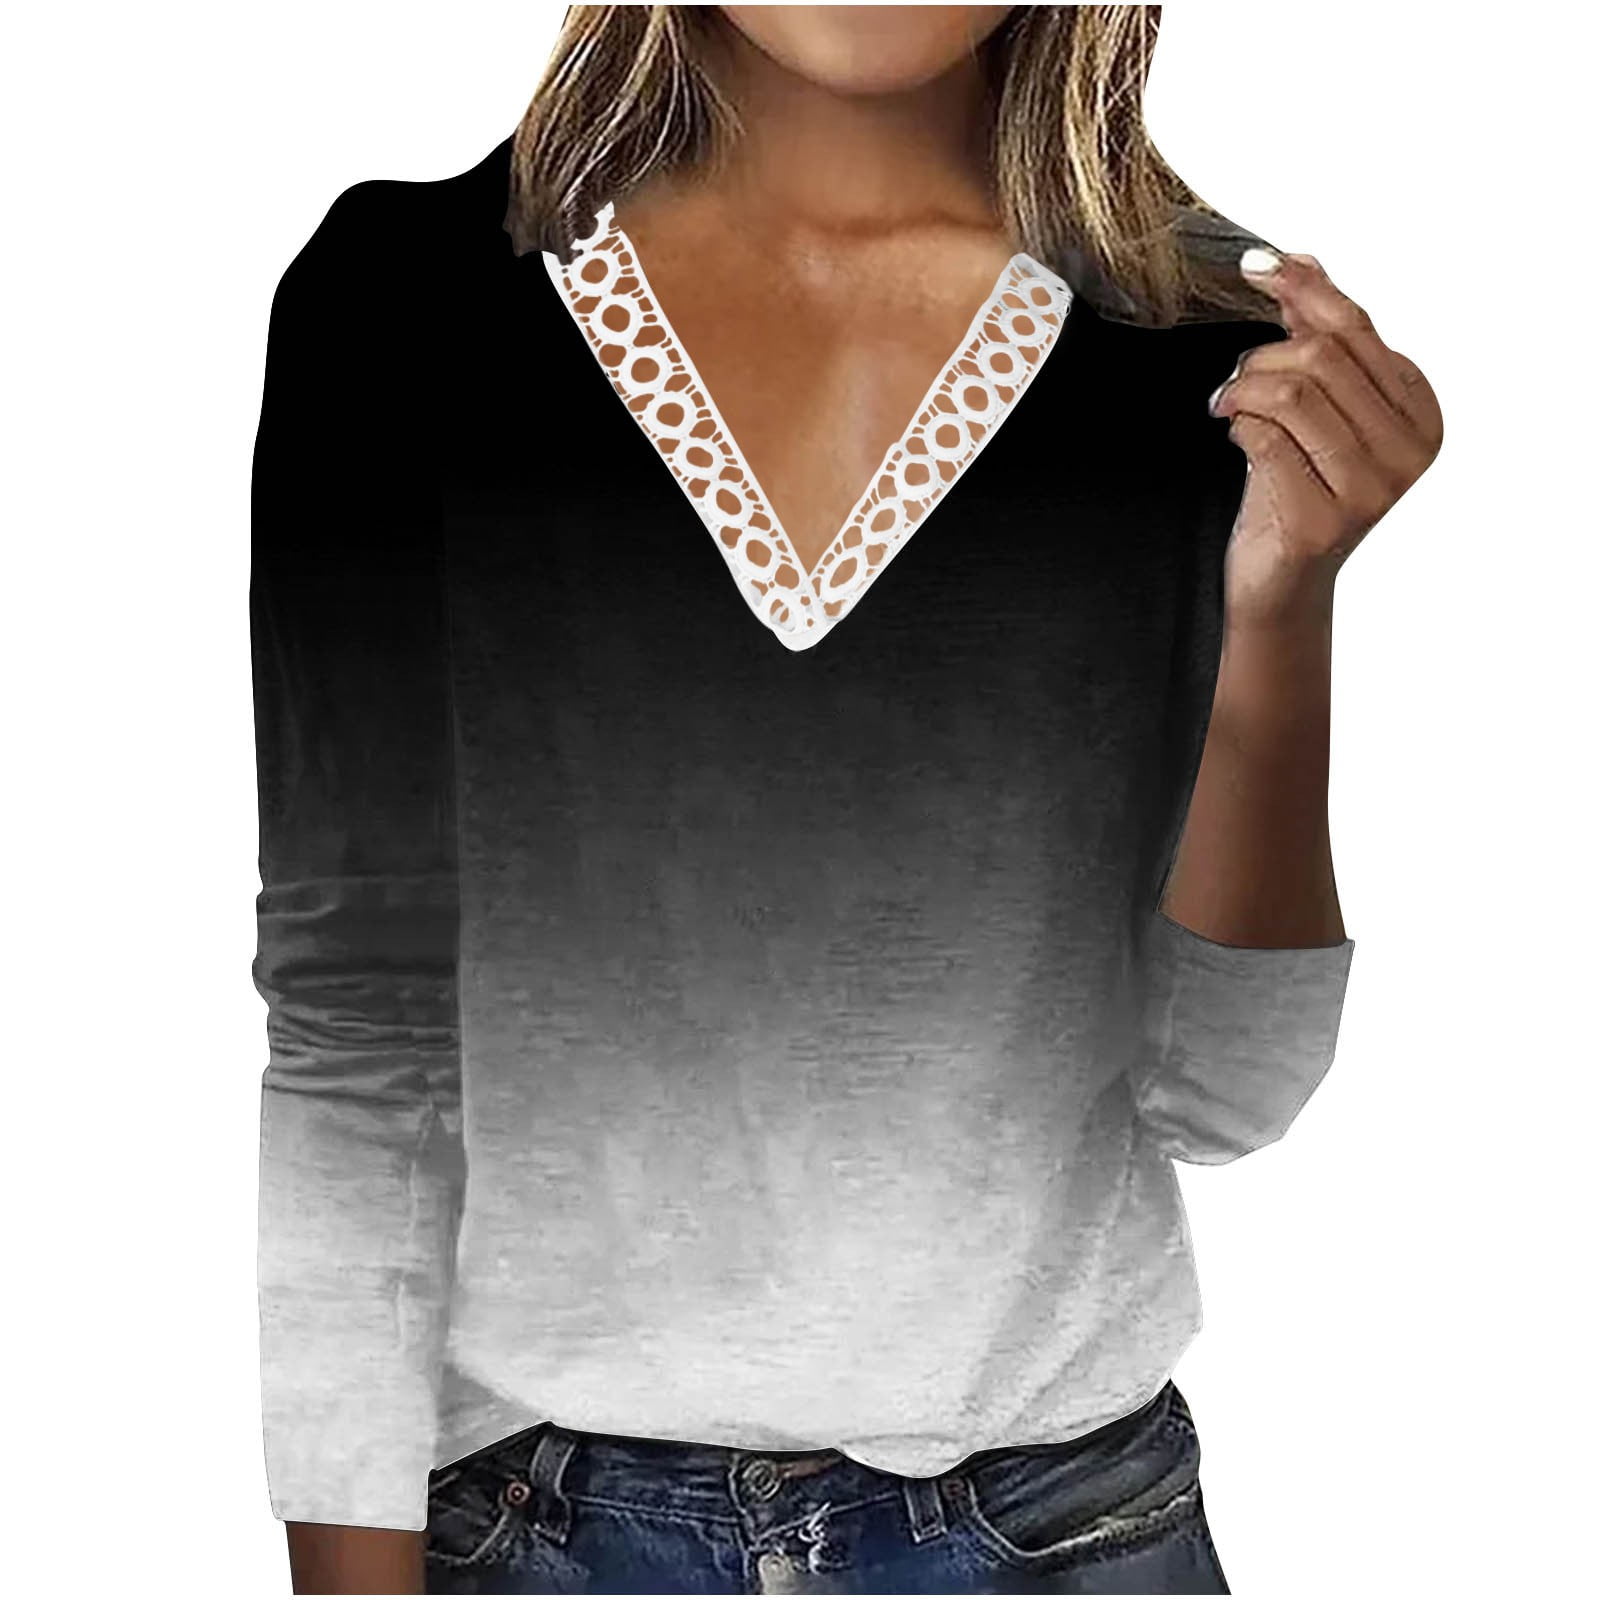 Chic on Repeat Black V-Neck Long Sleeve Top